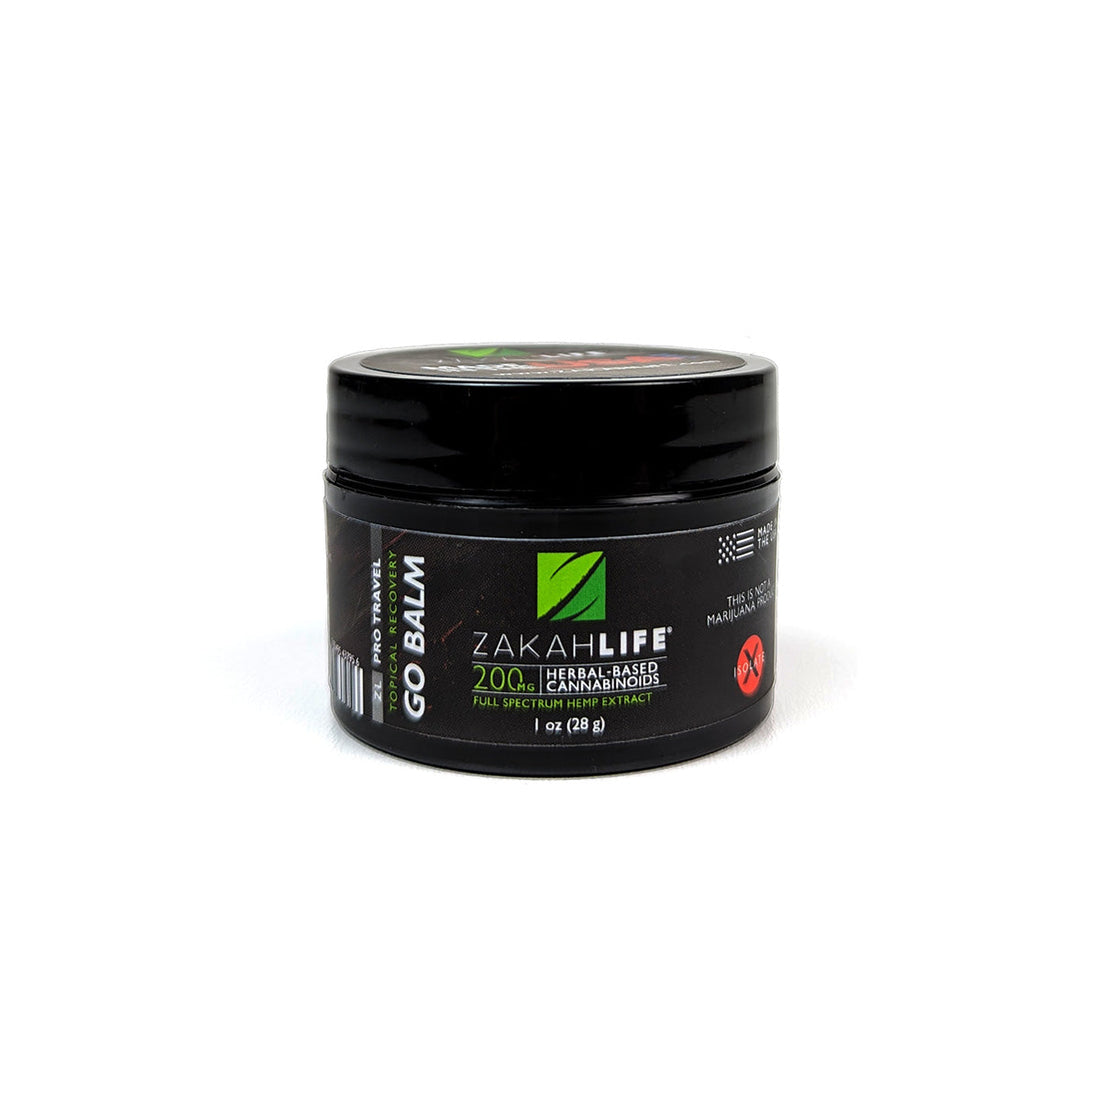 a picture of organic CBD topical relief balm for pain relief. Its called GOBALM